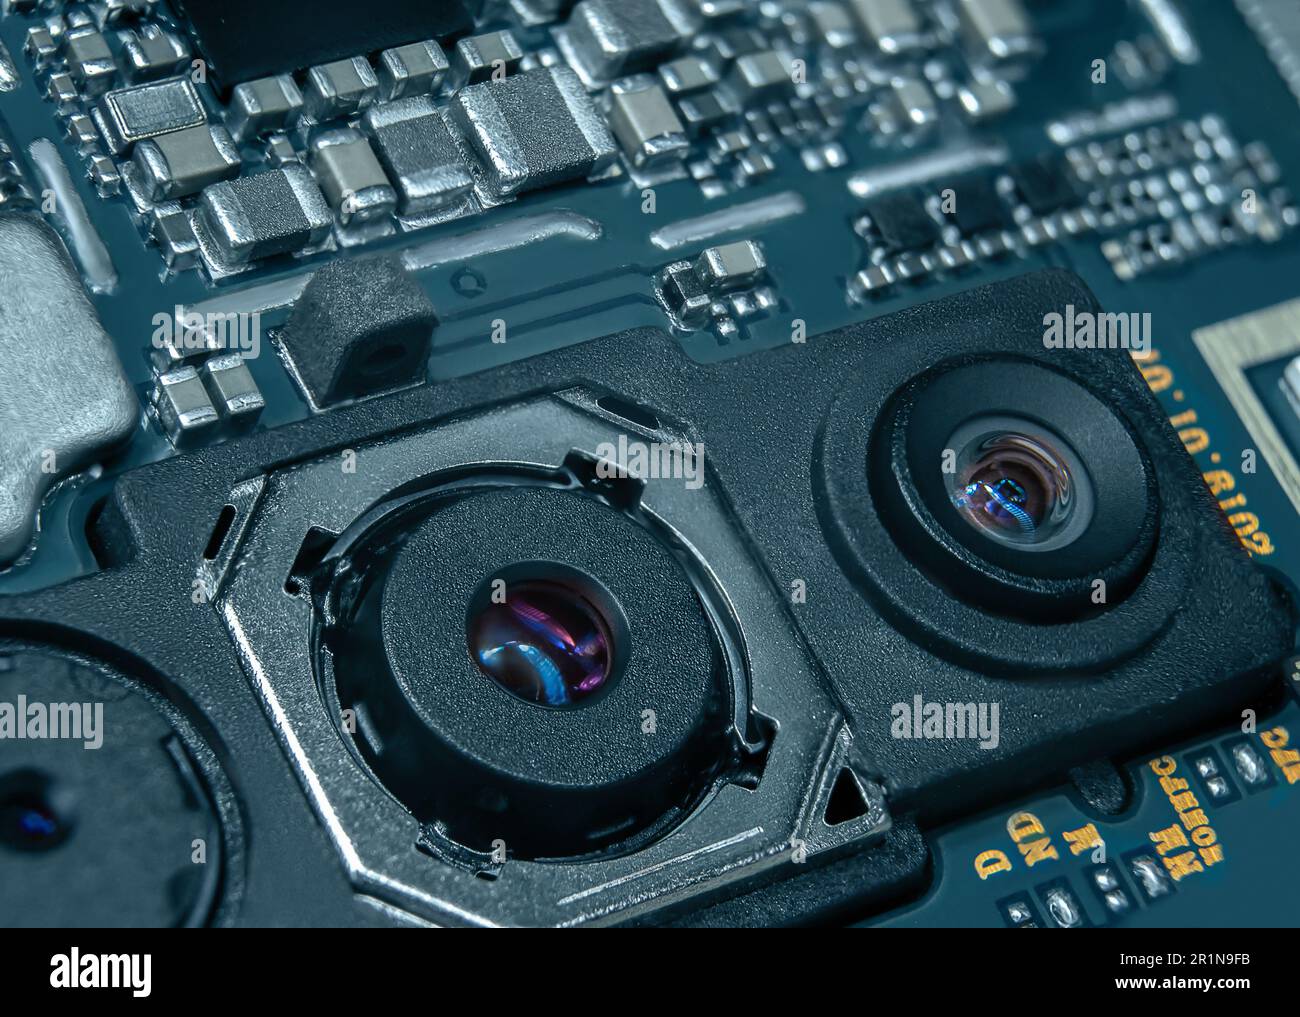 Macro shot of the smartphone's main board with the camera unit in the foreground Stock Photo